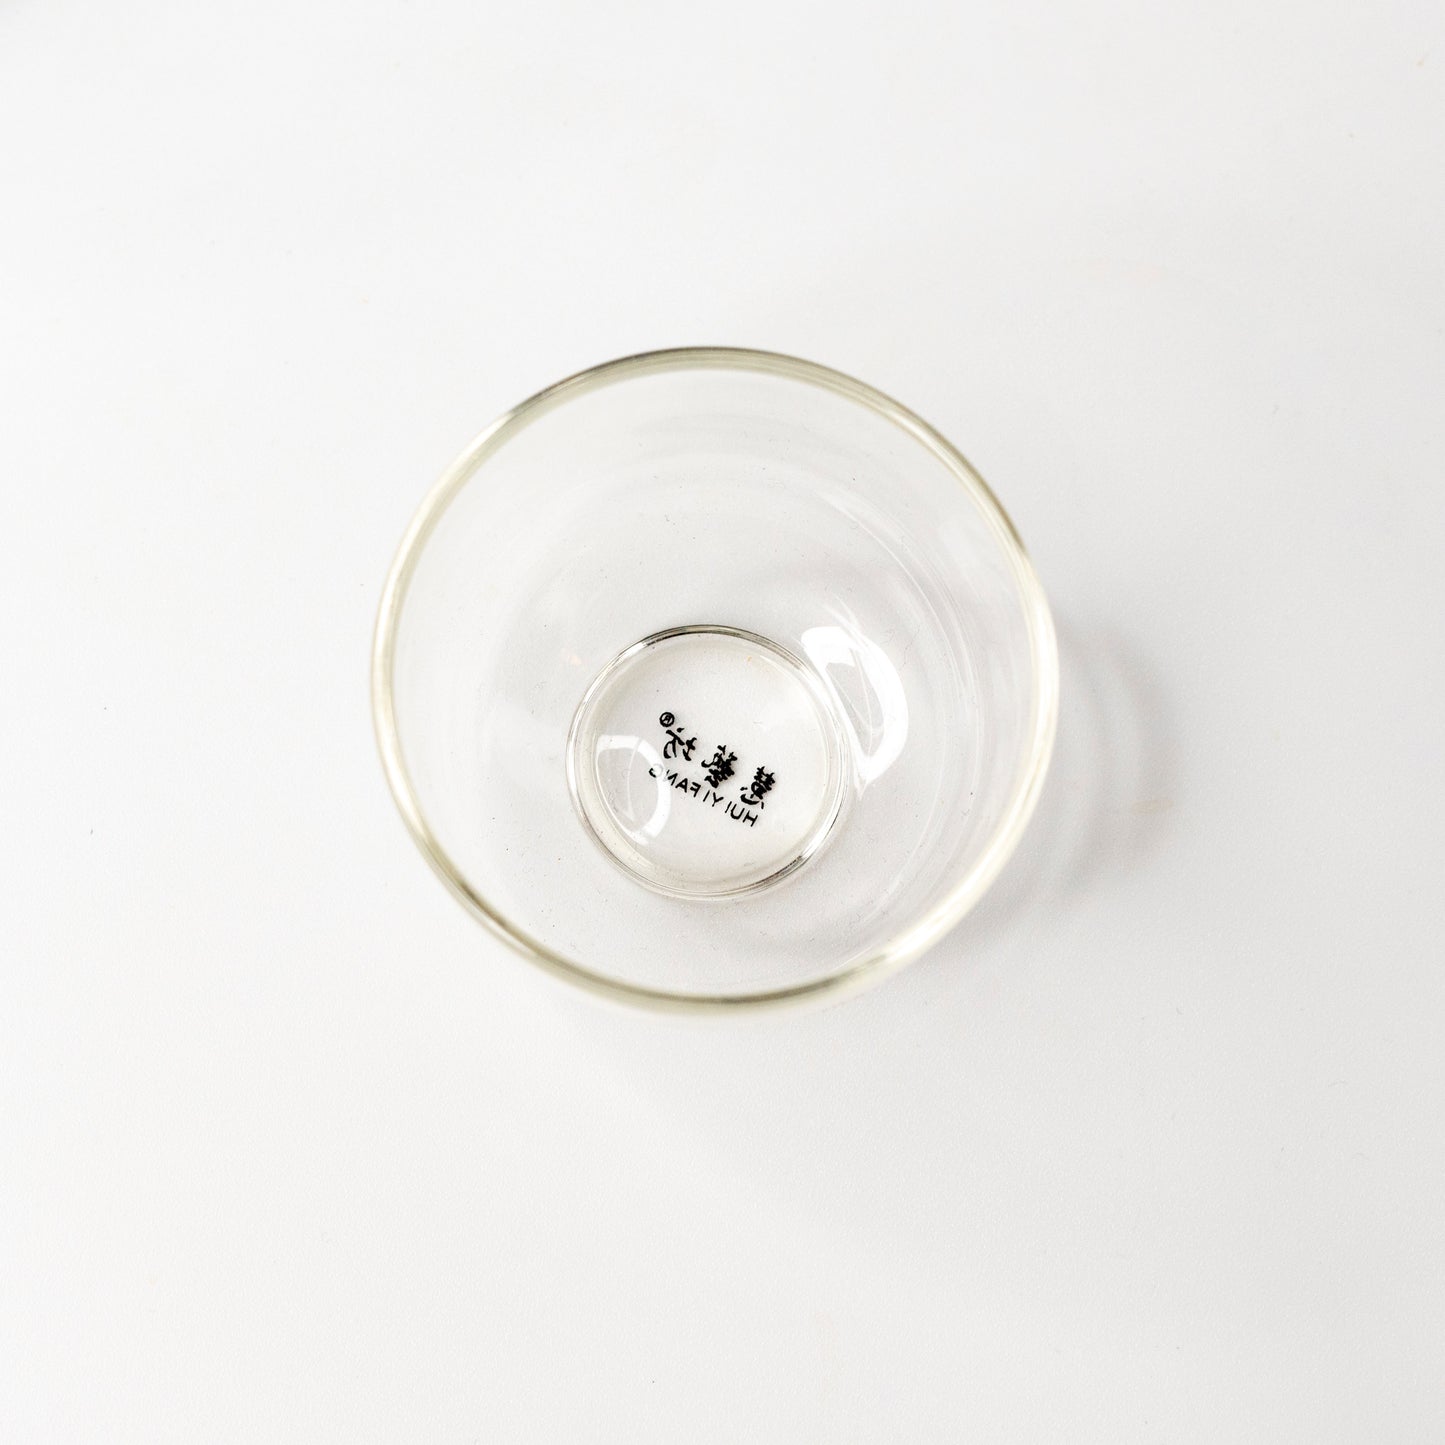 Small glass cup